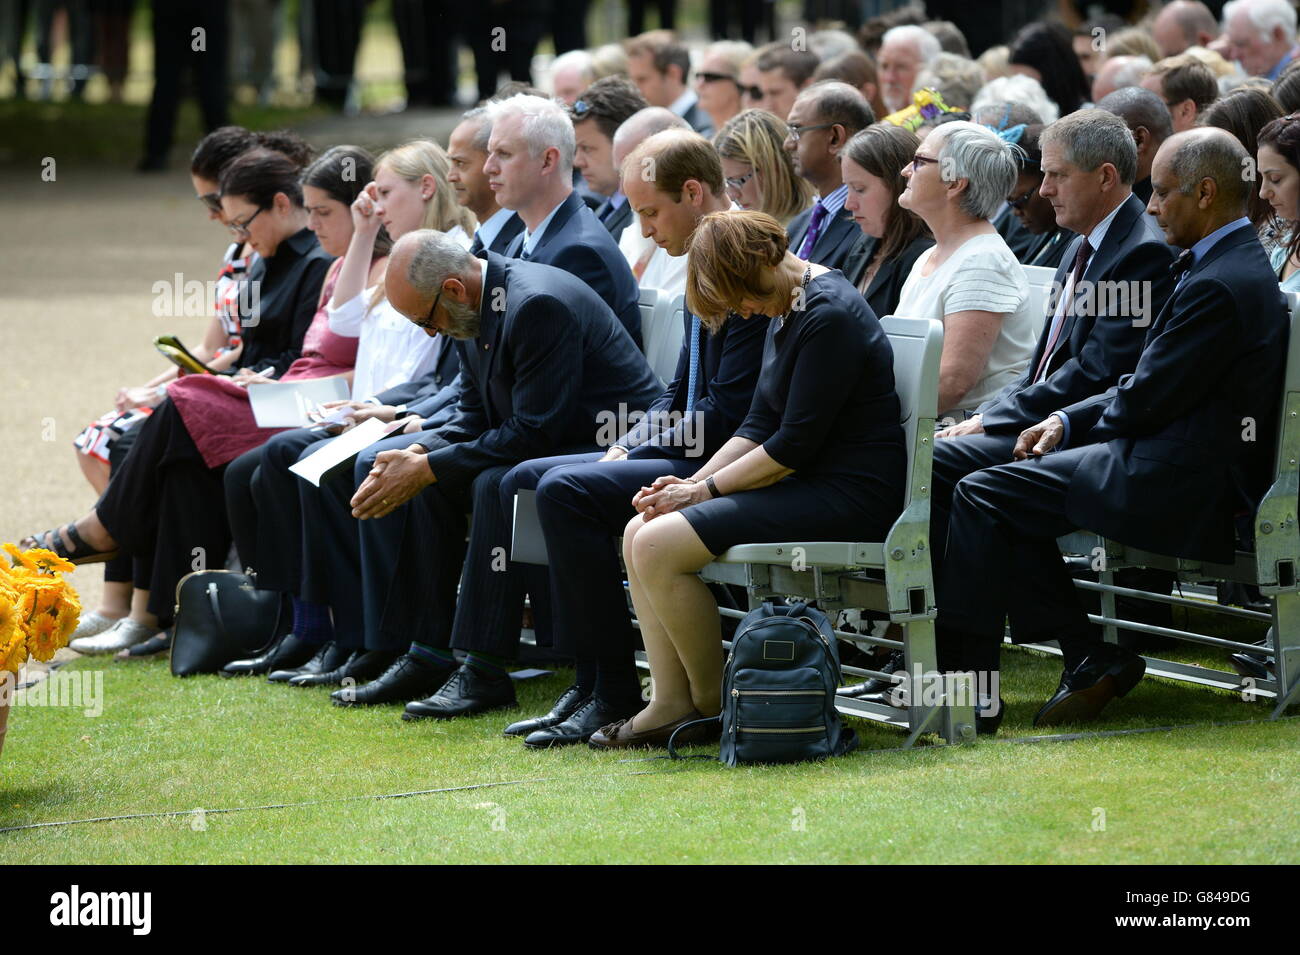 The Duke of Cambridge (second right) sits with Gerald Oppenheim, who was chairman of the London Bombing Relief Charitable Fund (third right) and Labour MP Tessa Jowell, during the July 7 memorial in Hyde Park, London, as Britain remembers the July 7 attacks amid a welter of warnings about the enduring and changing threat from terrorism a decade on. Stock Photo